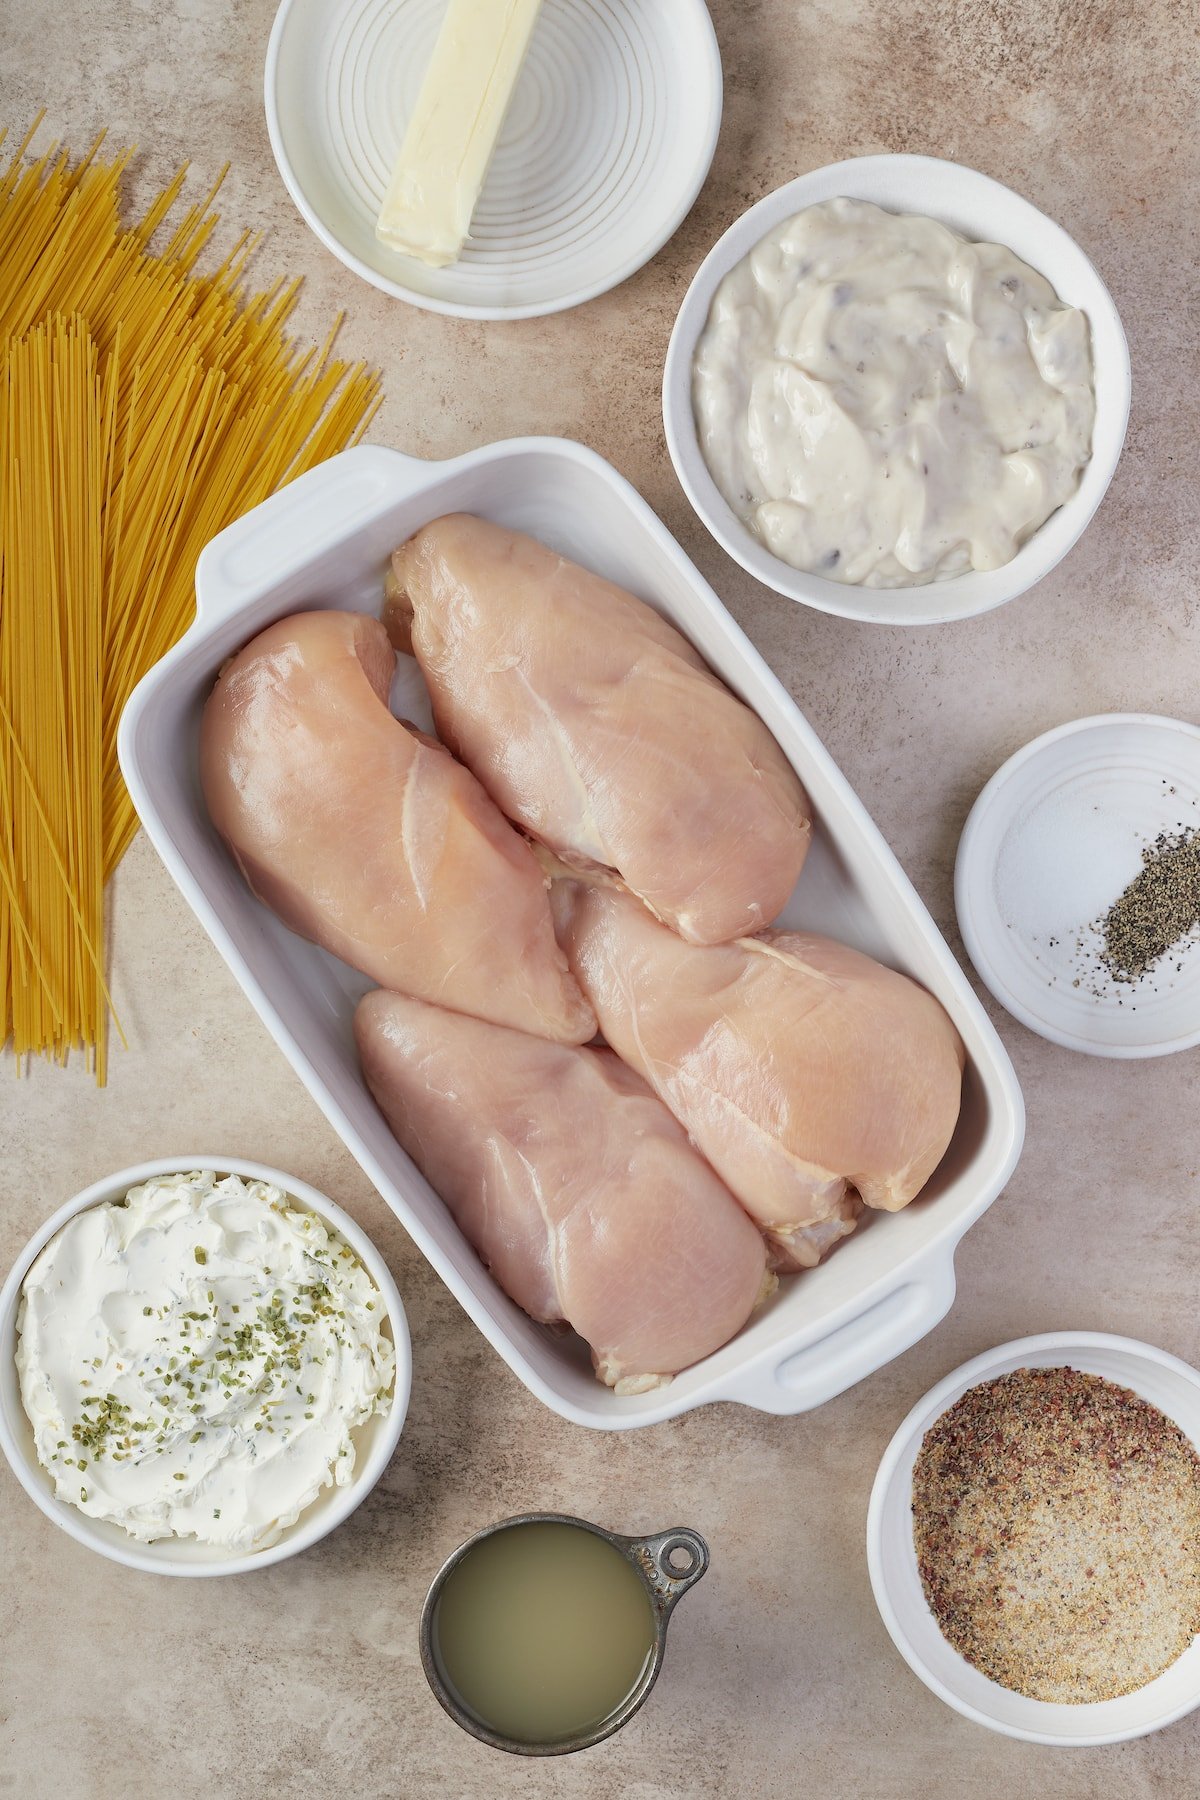 The ingredients for creamy chicken pasta, also known as angel chicken.